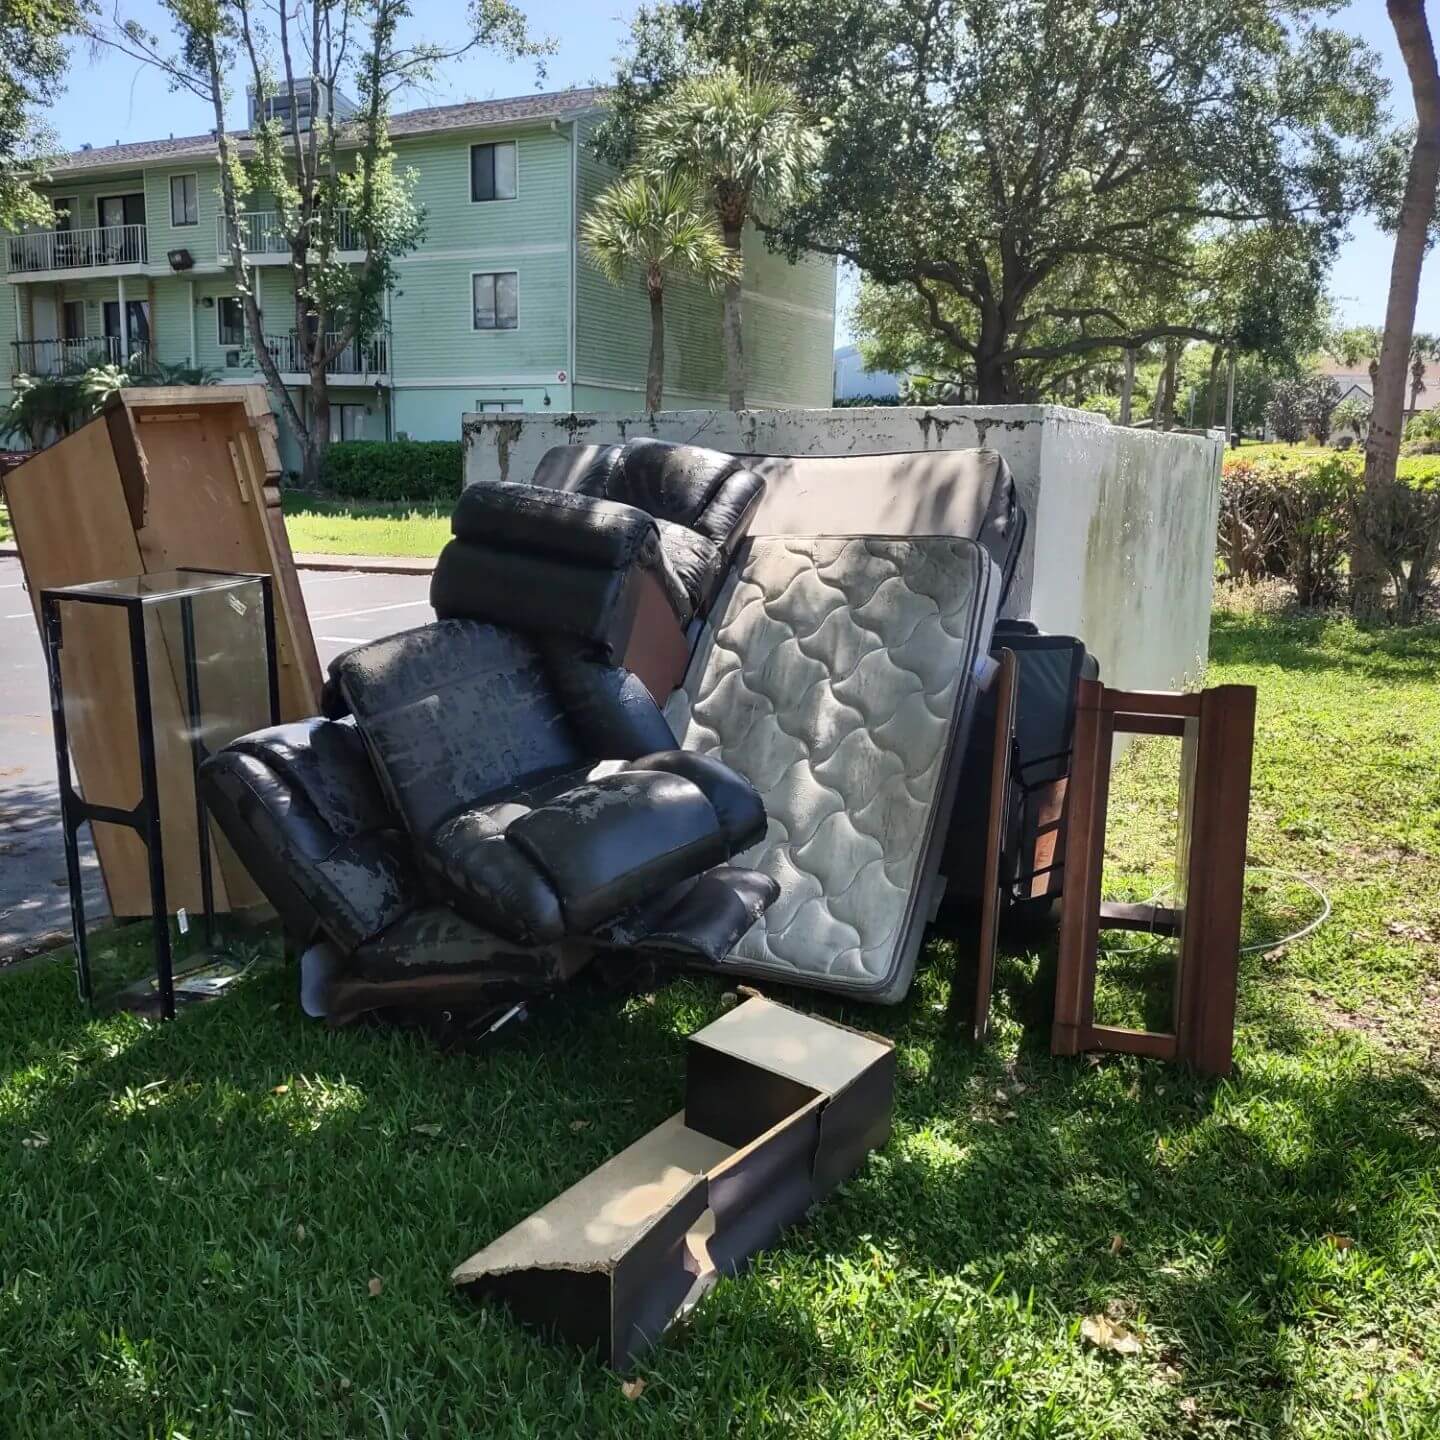 Foreclosure Clean Outs-Boca Raton Junk Removal and Trash Haulers